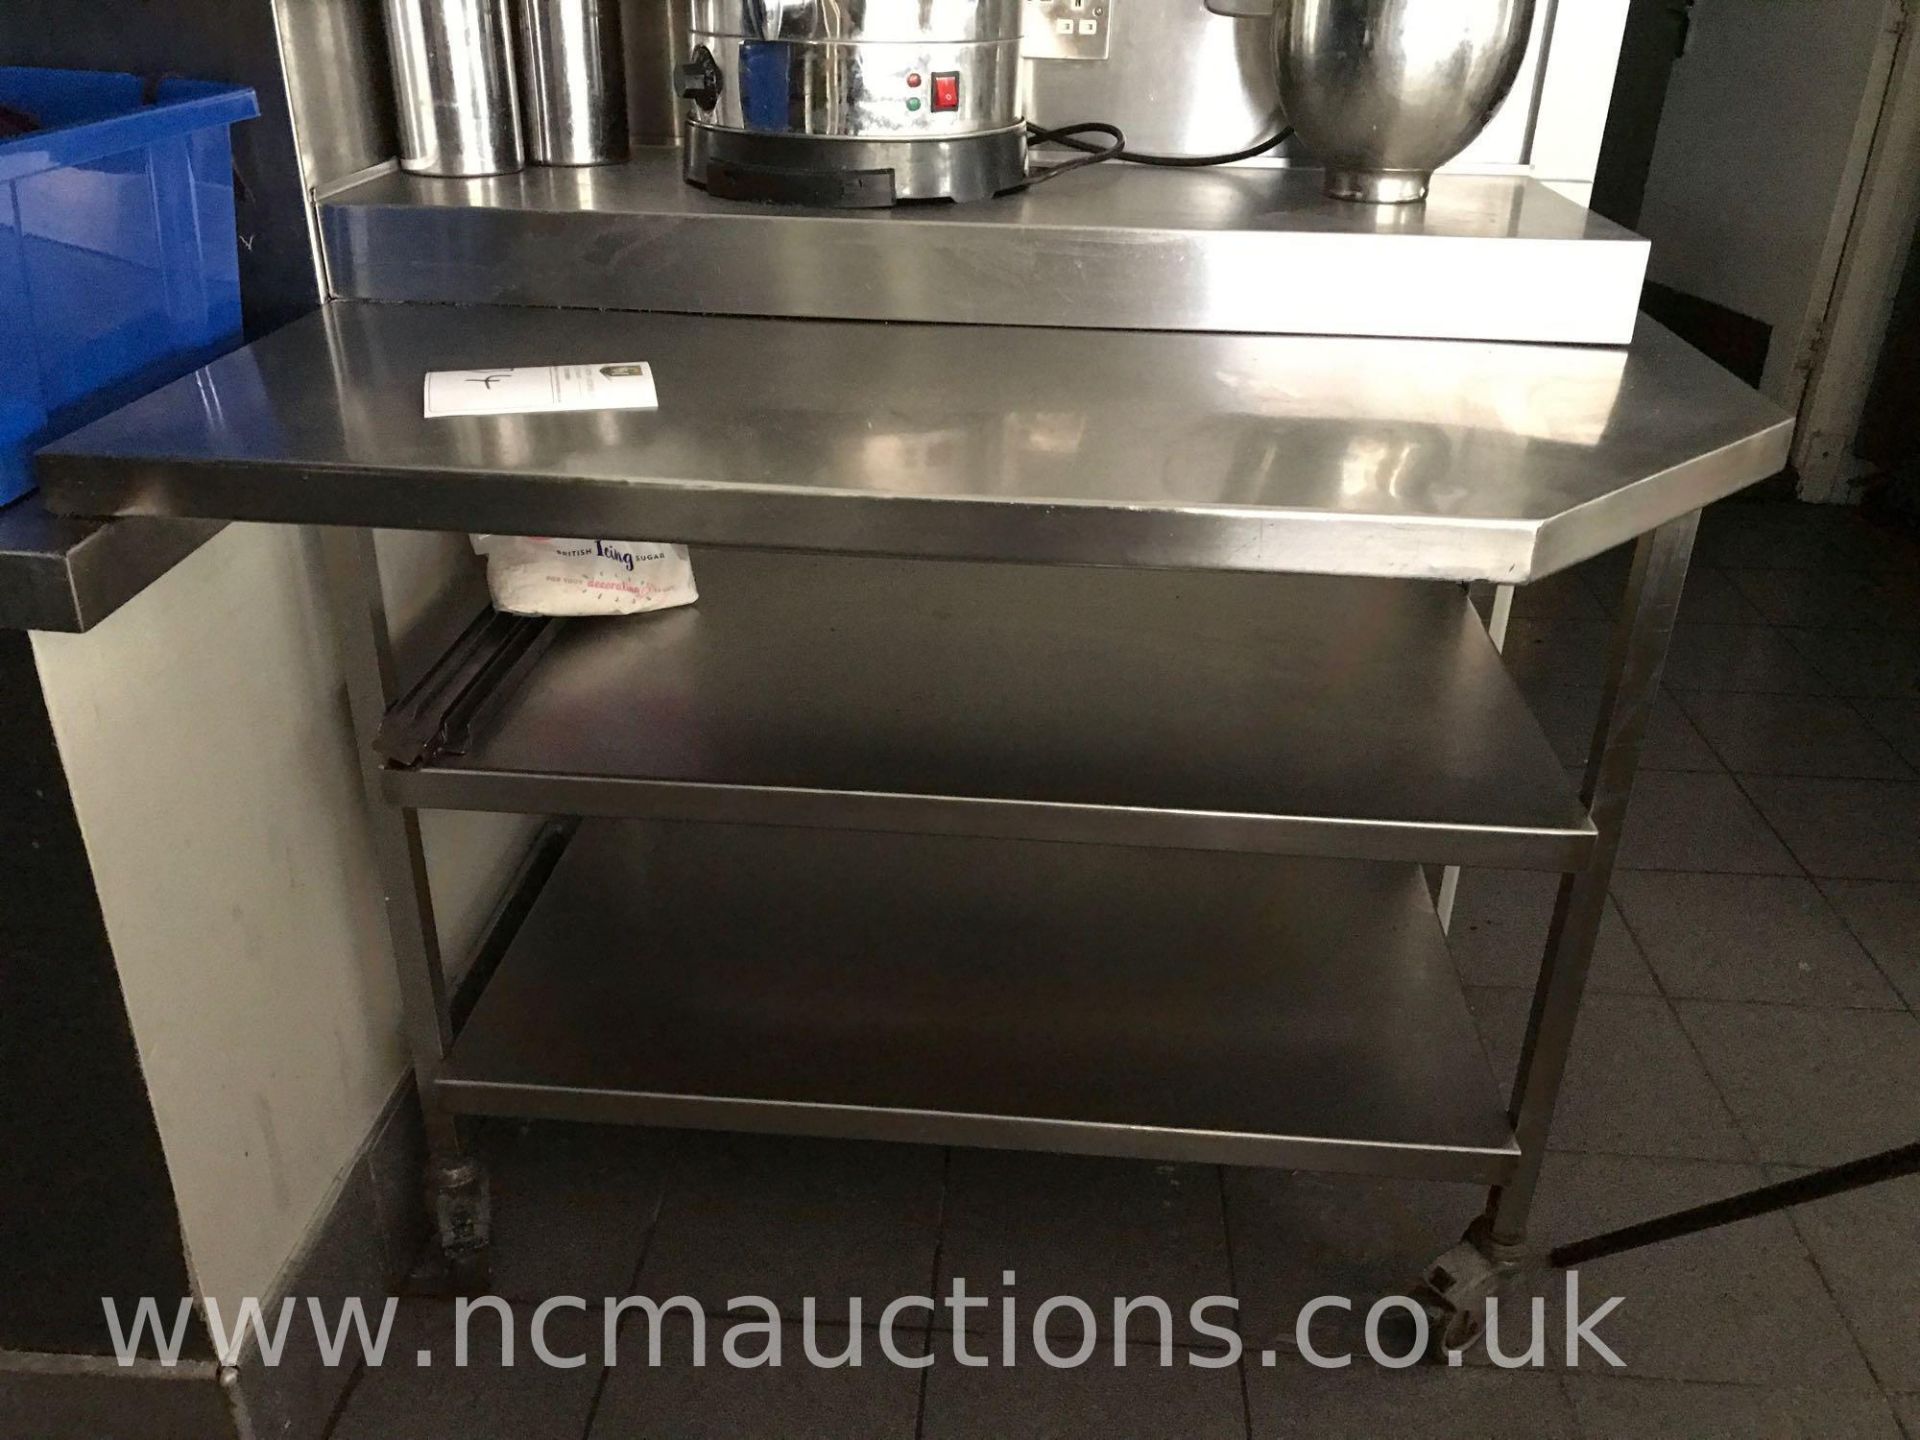 Stainless steel counter on castor wheels